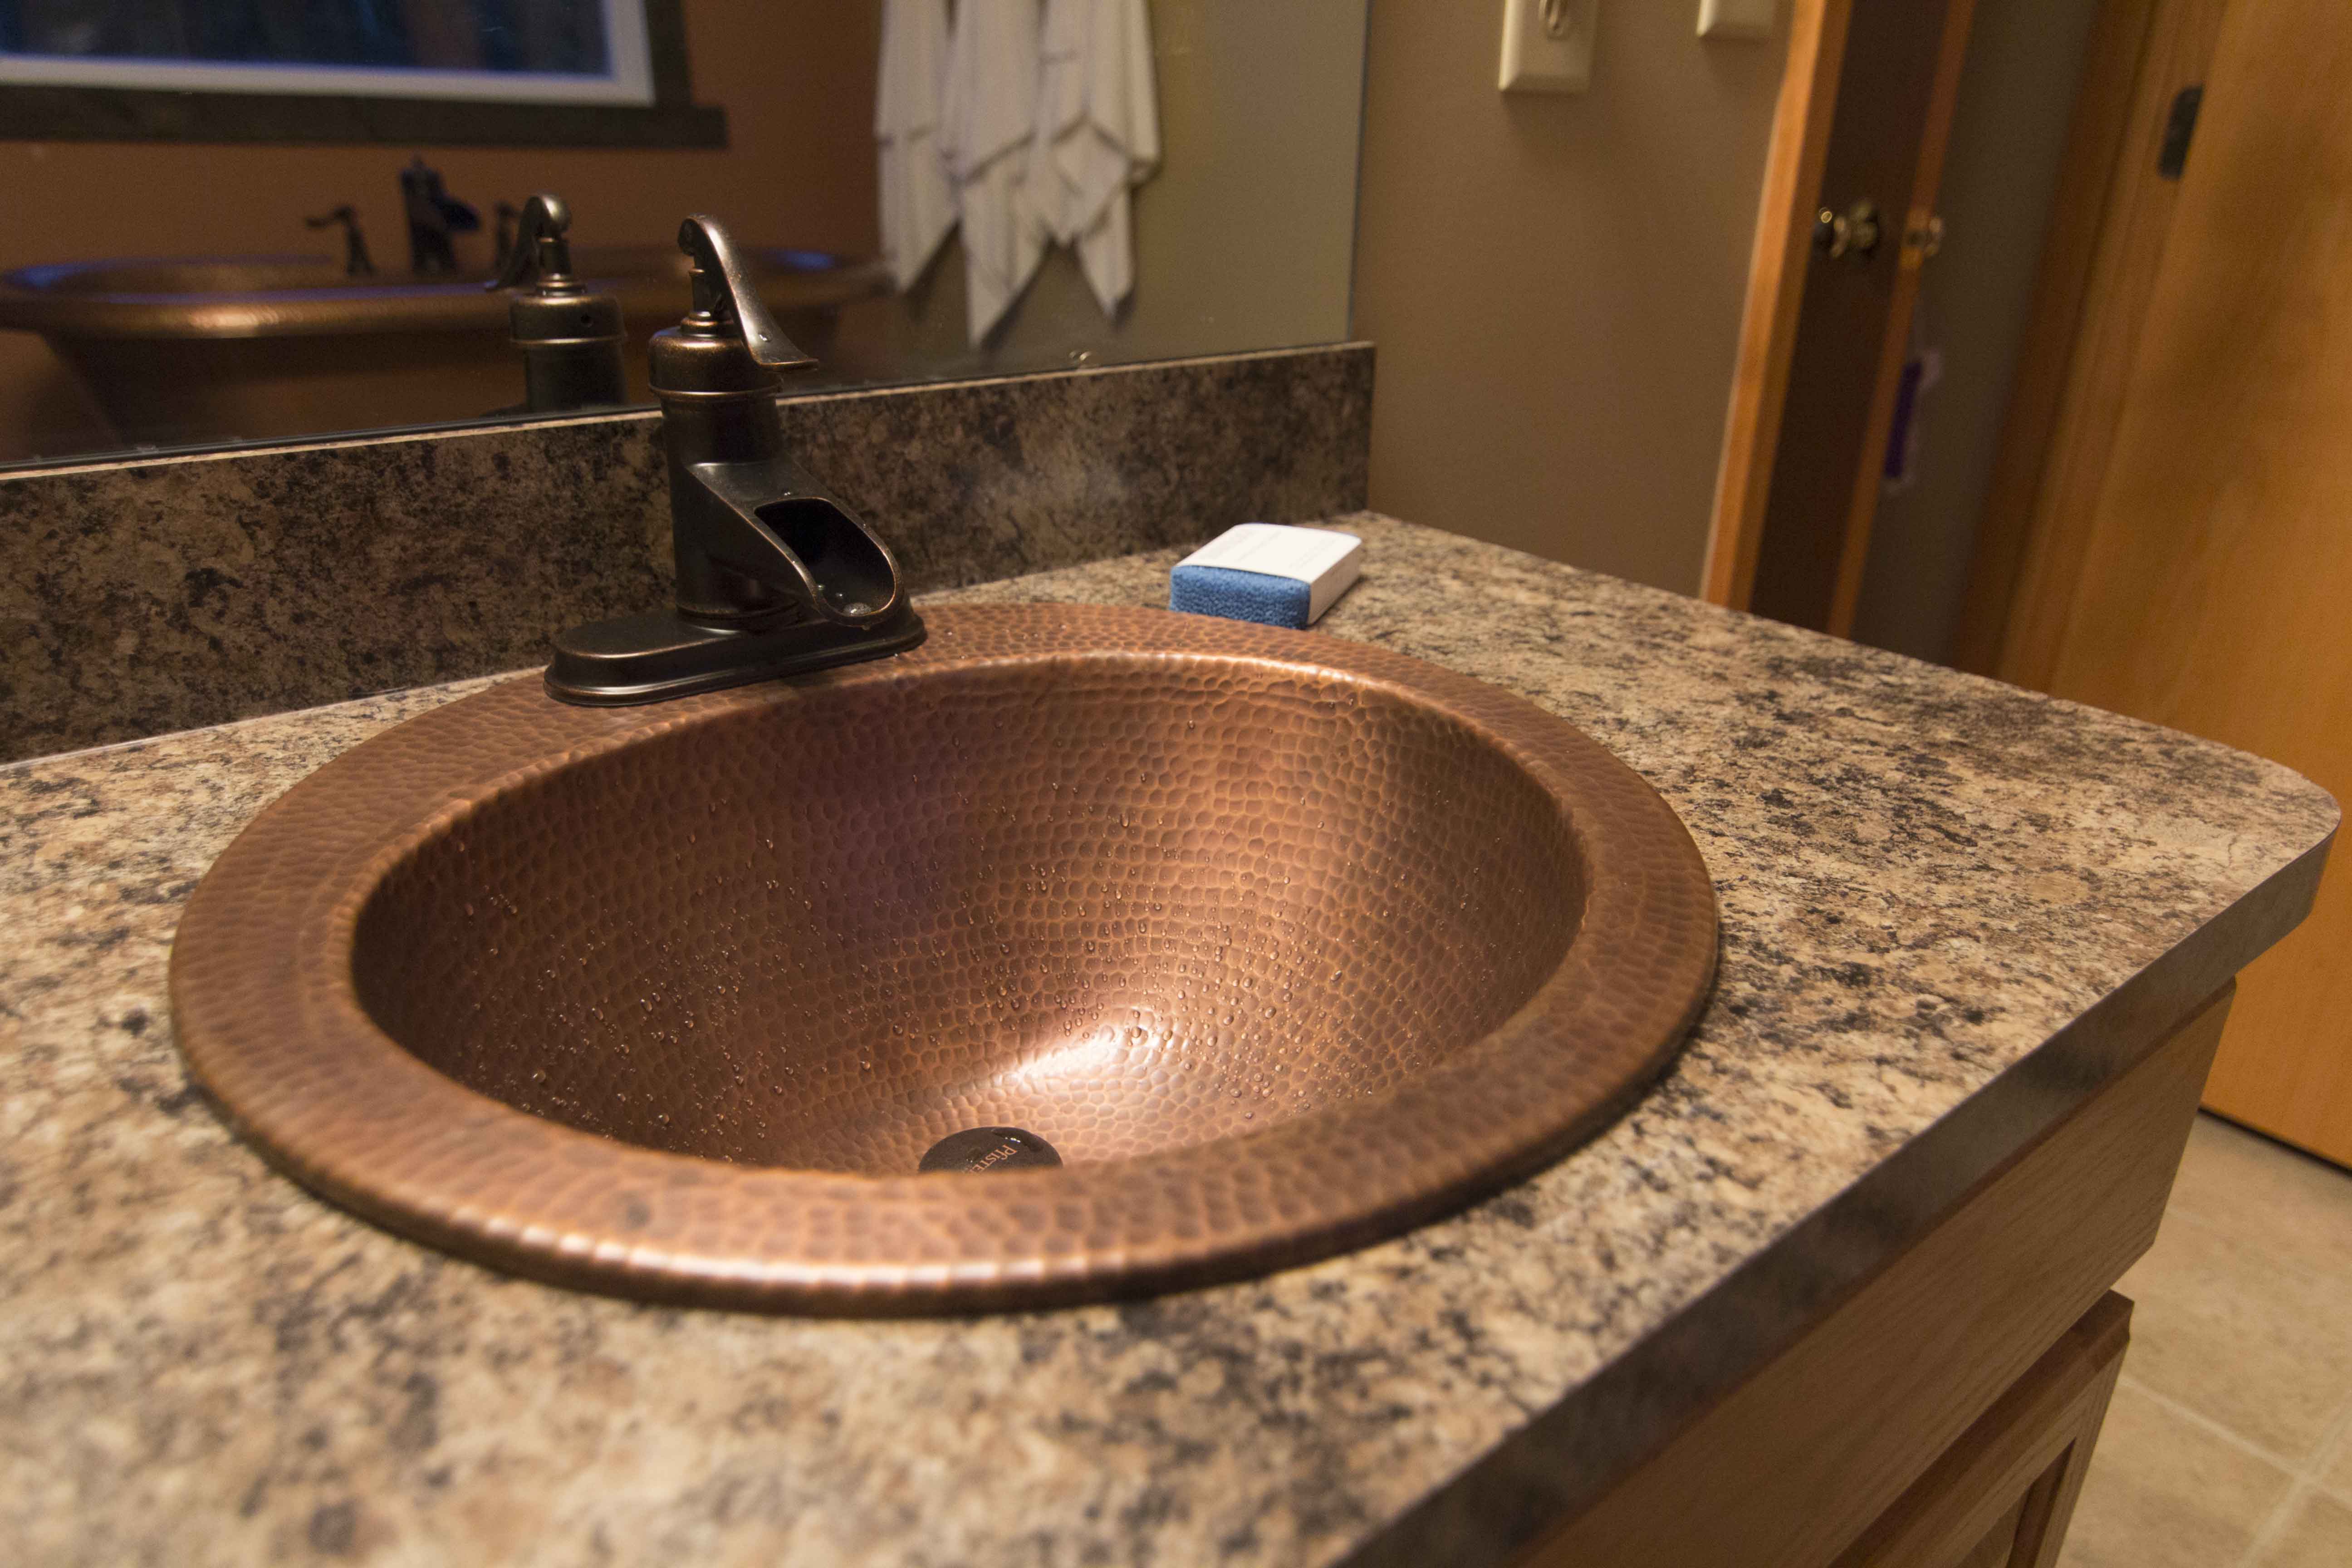 How To Replace A Copper Bathroom Sink The Bell Drop In Copper